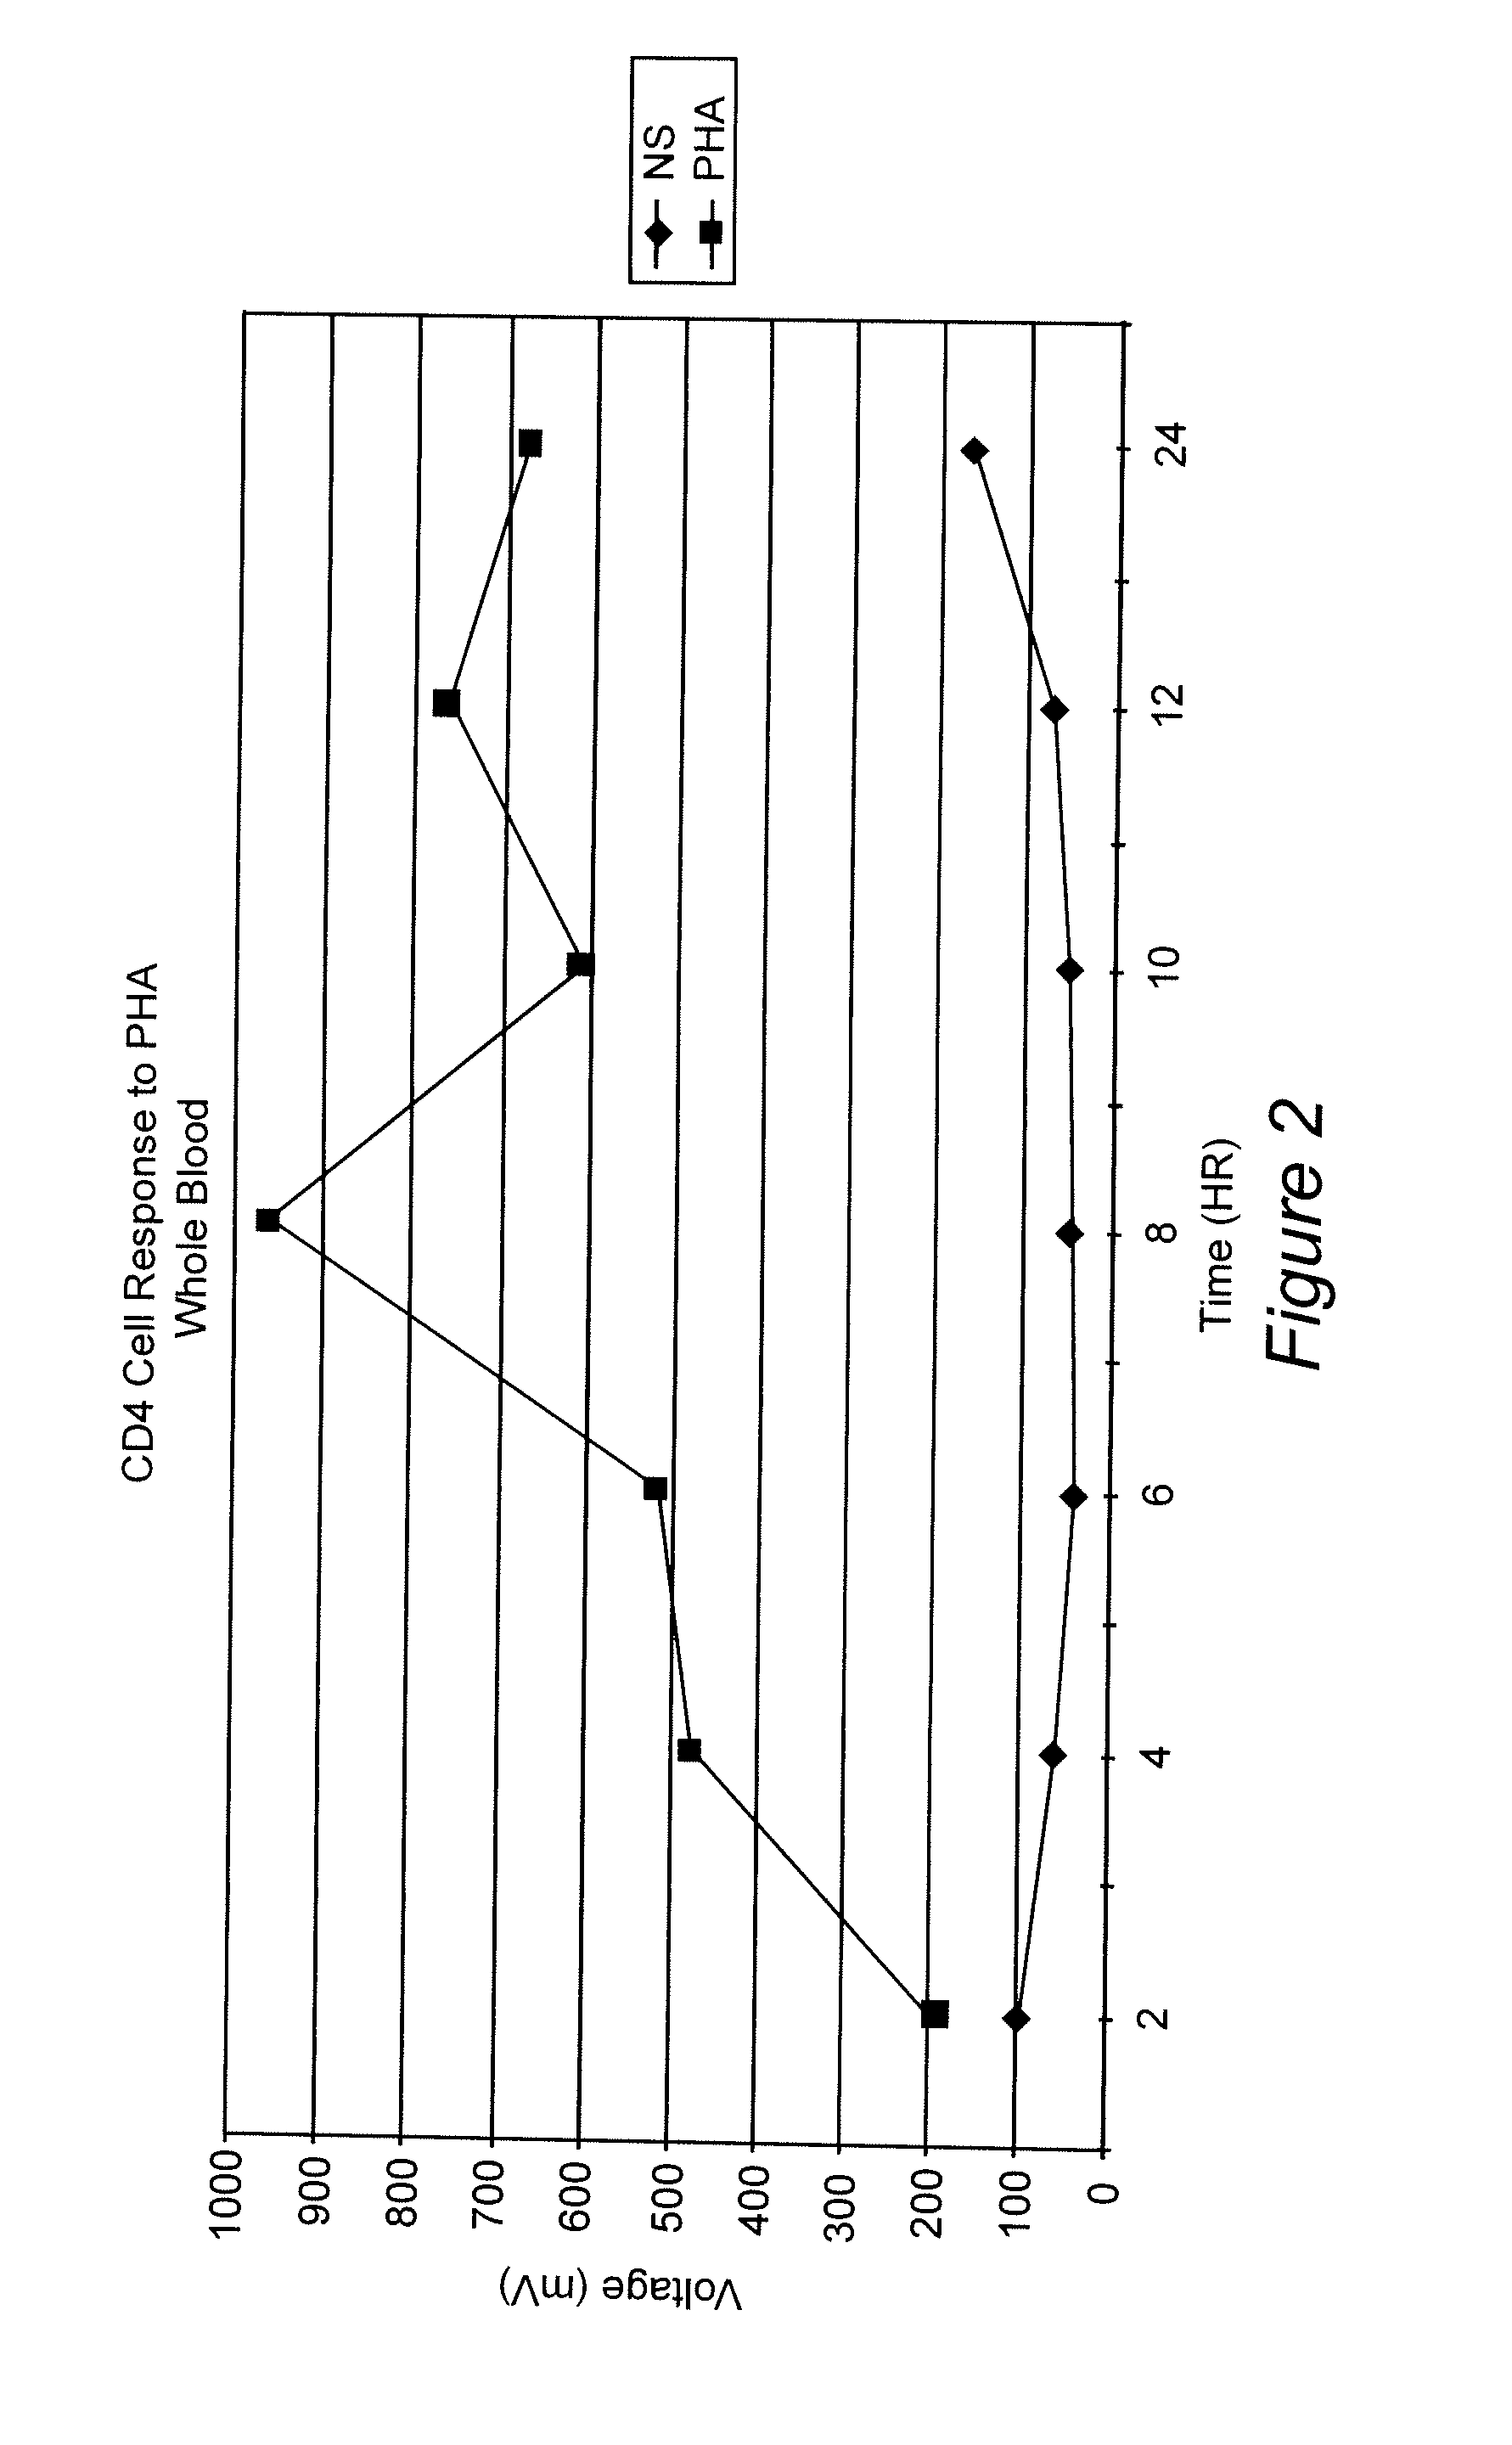 Method to confirm immunosuppression in human patients by measuring lymphocyte activation